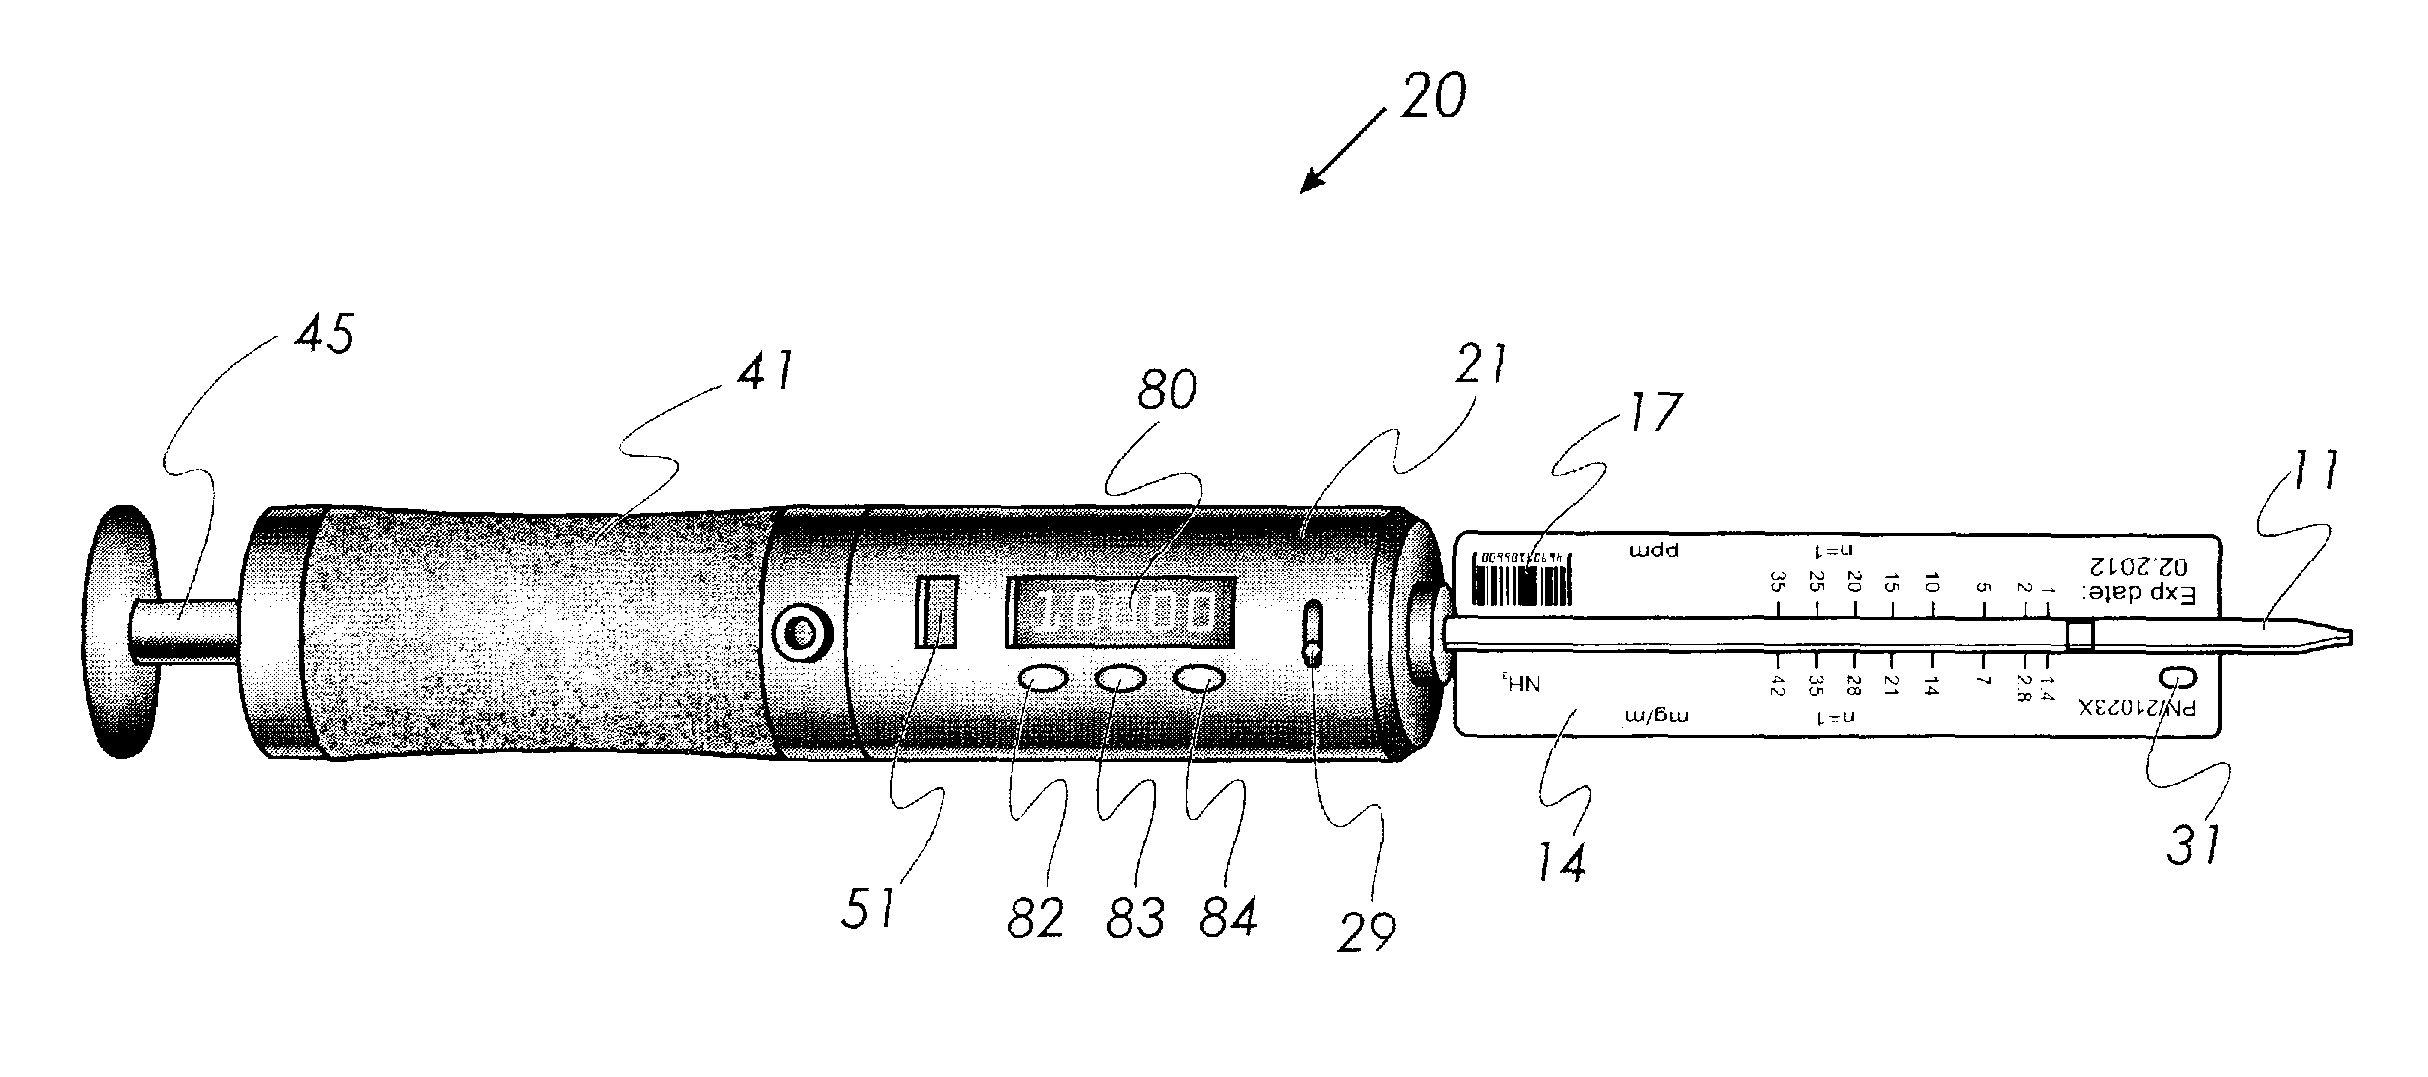 System for visual and electronic reading of colorimetric tubes